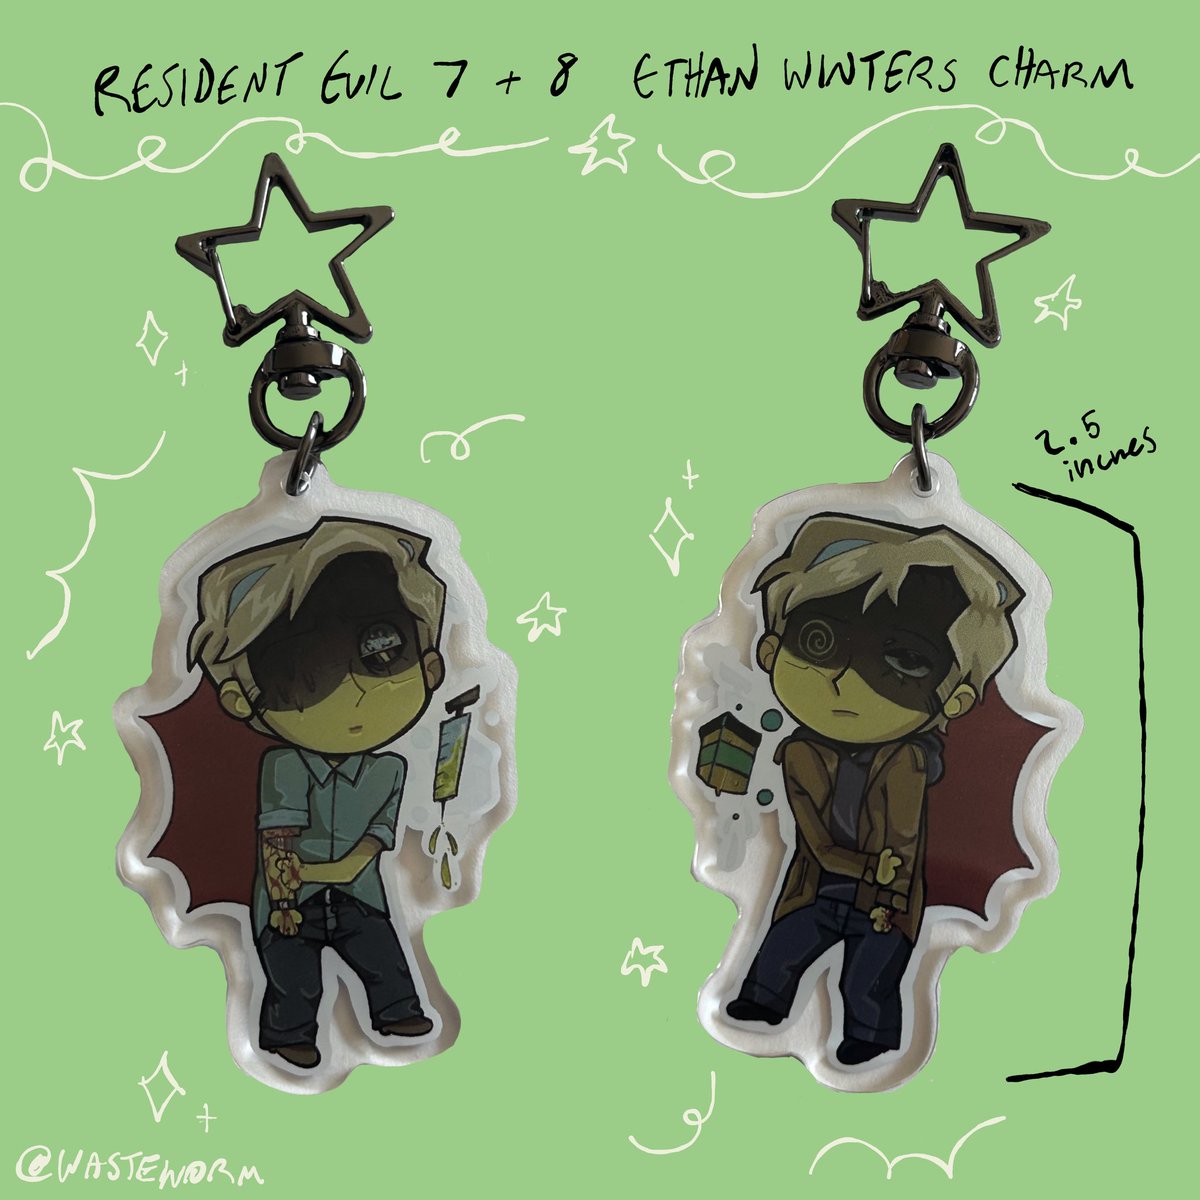 the new charms have been added to my shop and are ready to ship out! Here’s my obligatory promo 🍷 #ethanwinters #residentevil etsy.com/listing/171077…